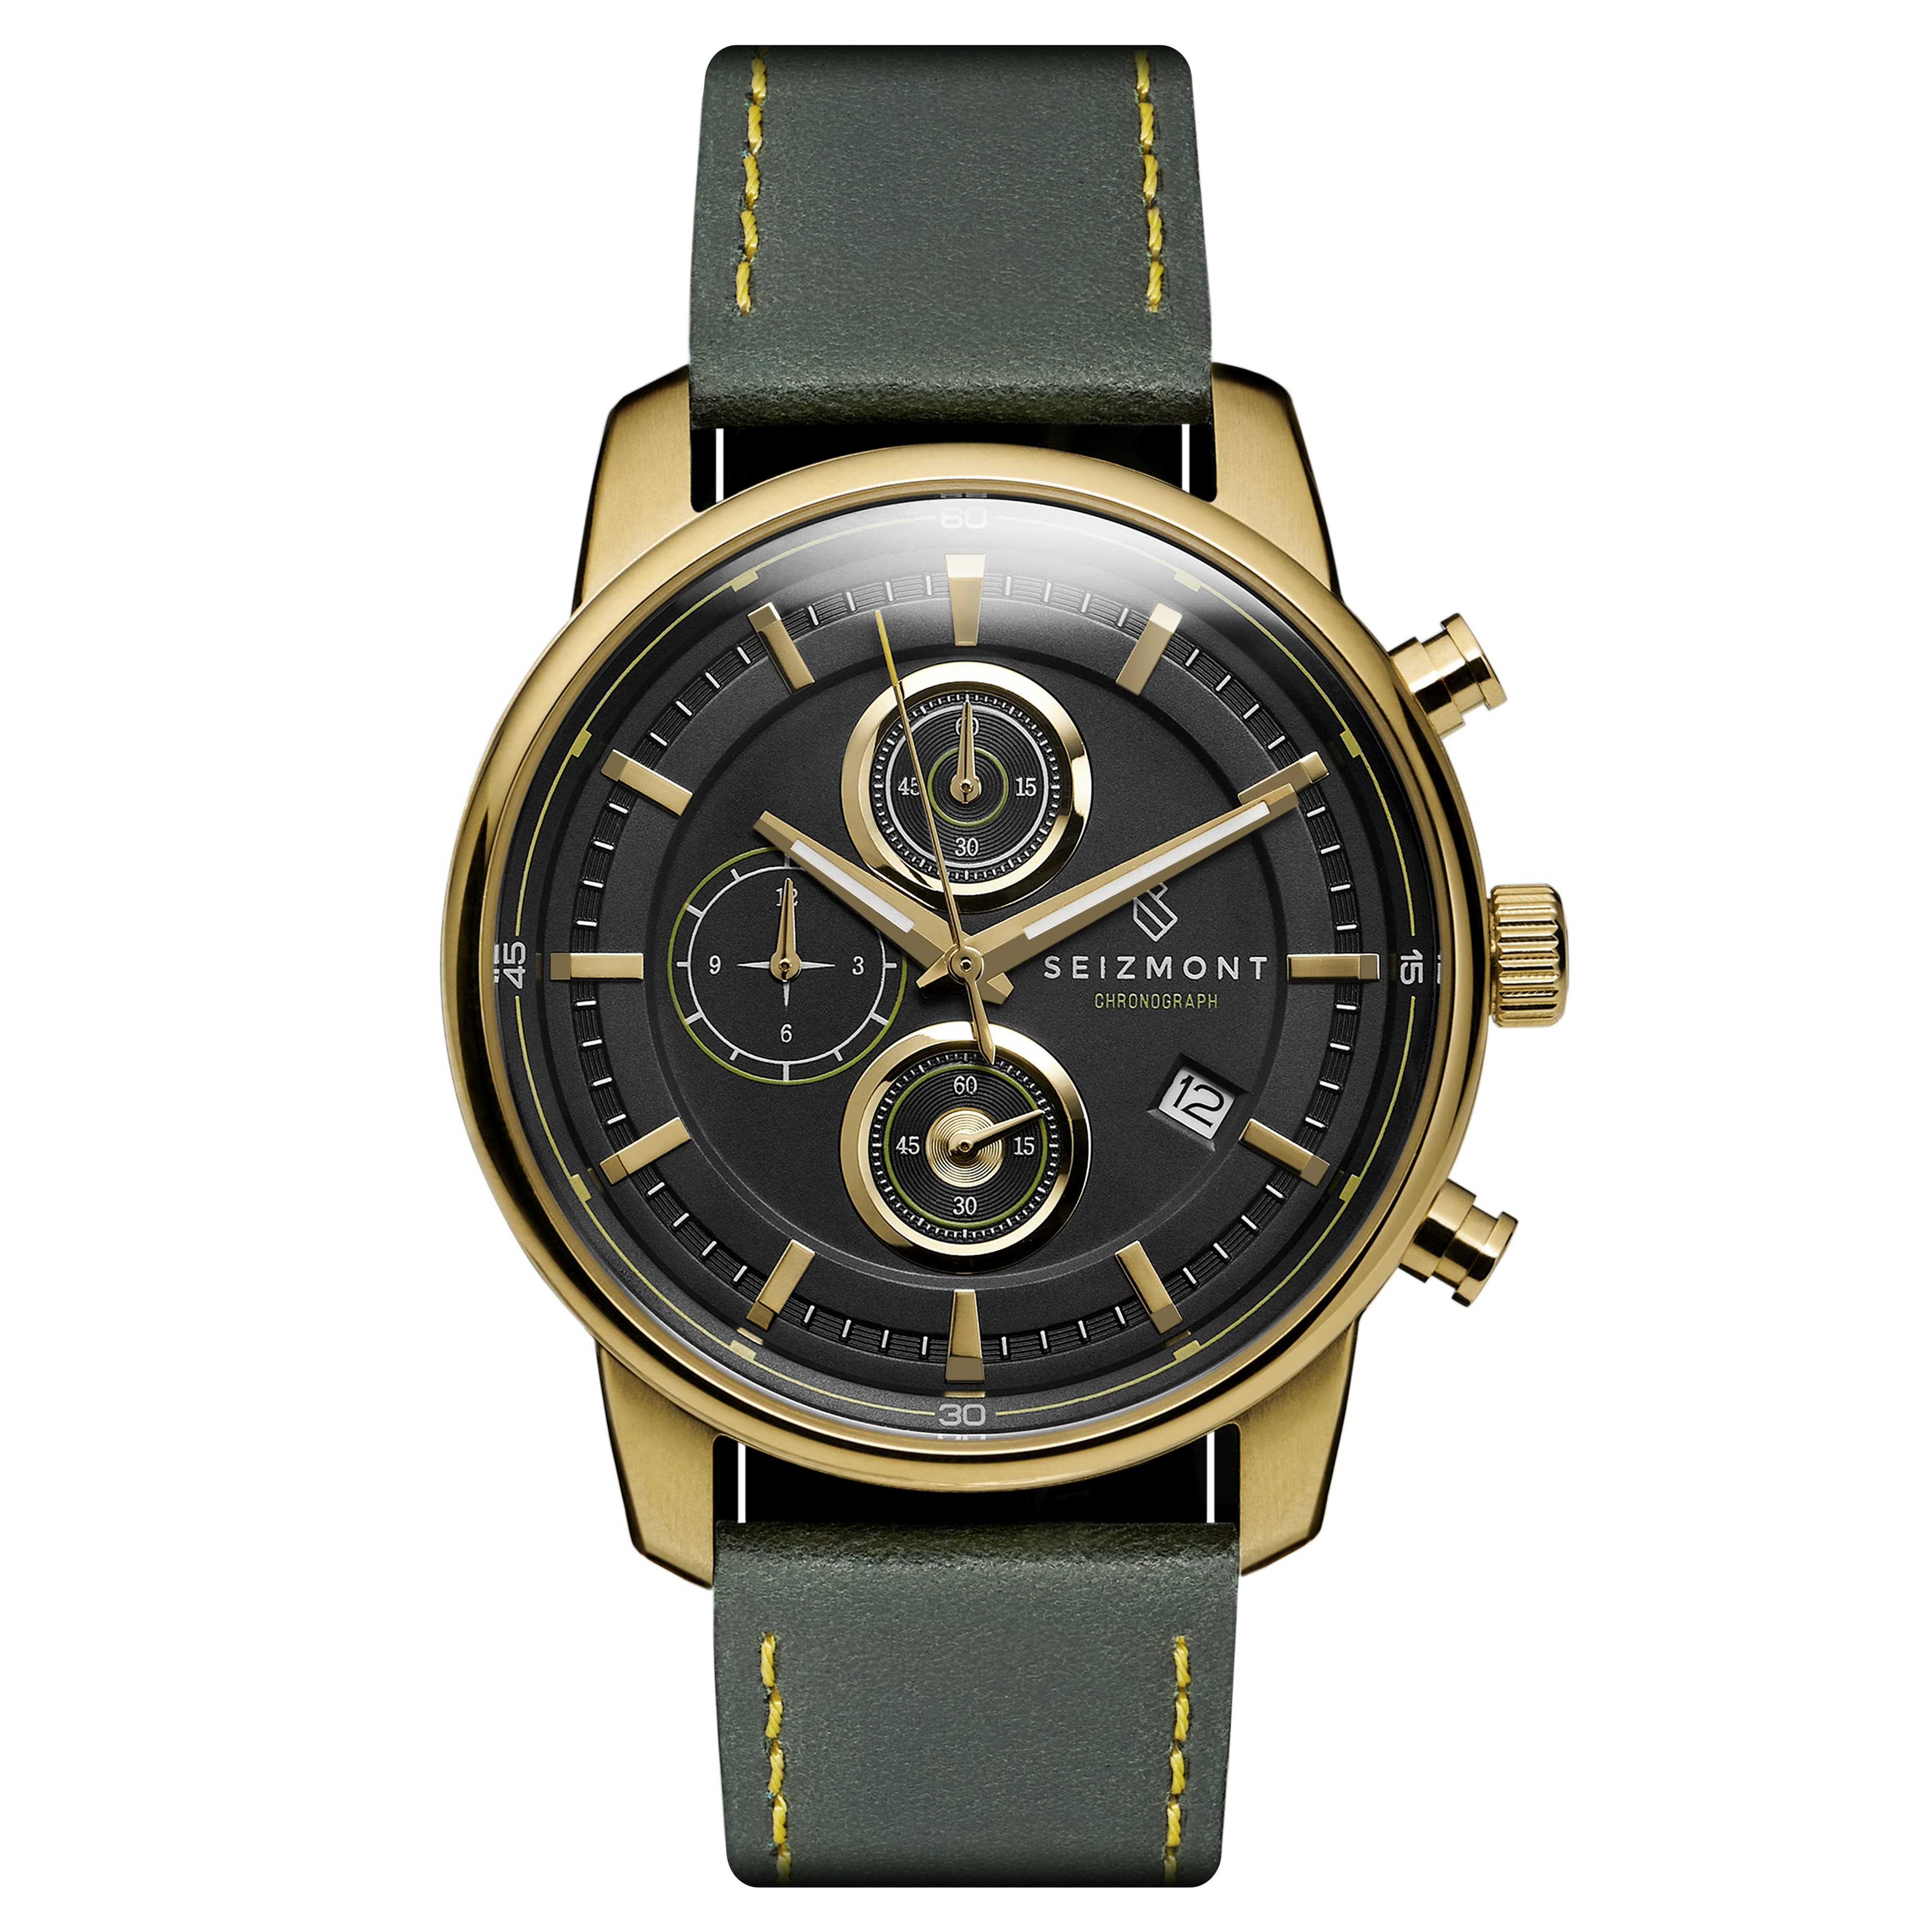 Parva | Gold-Tone Chronograph Watch & In | stock! With Black Green Strap Dial Leather Seizmont 